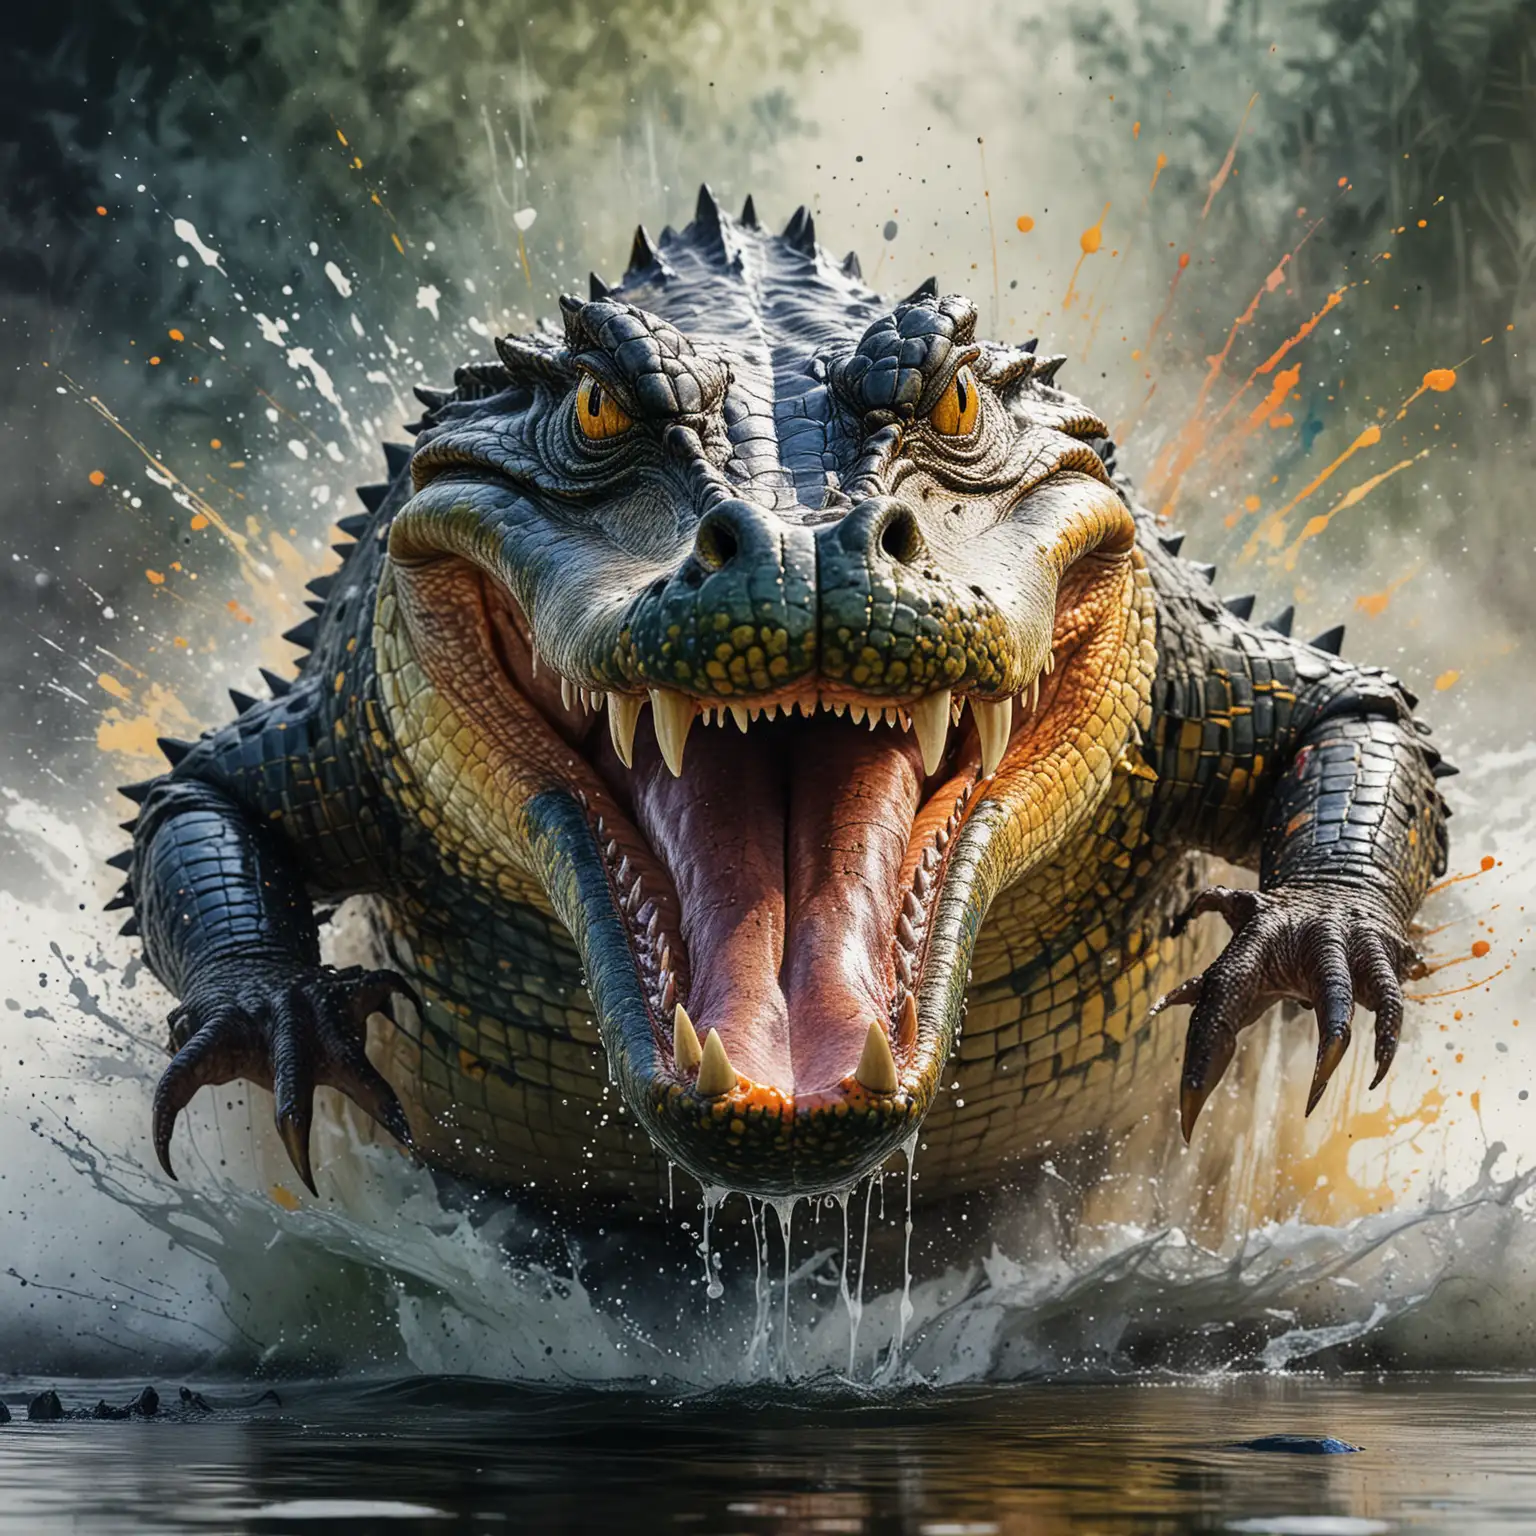 A wild alligator in full roar, charging forward with a fierce expression. The image is captured in a dynamic watercolor style, showcasing vibrant colors and fluid brushstrokes. Splashes and splatters around the alligator suggest its swift movement and wild energy. The body is particularly detailed with bright colors to emphasize its impressive size and the alligator's regal presence.